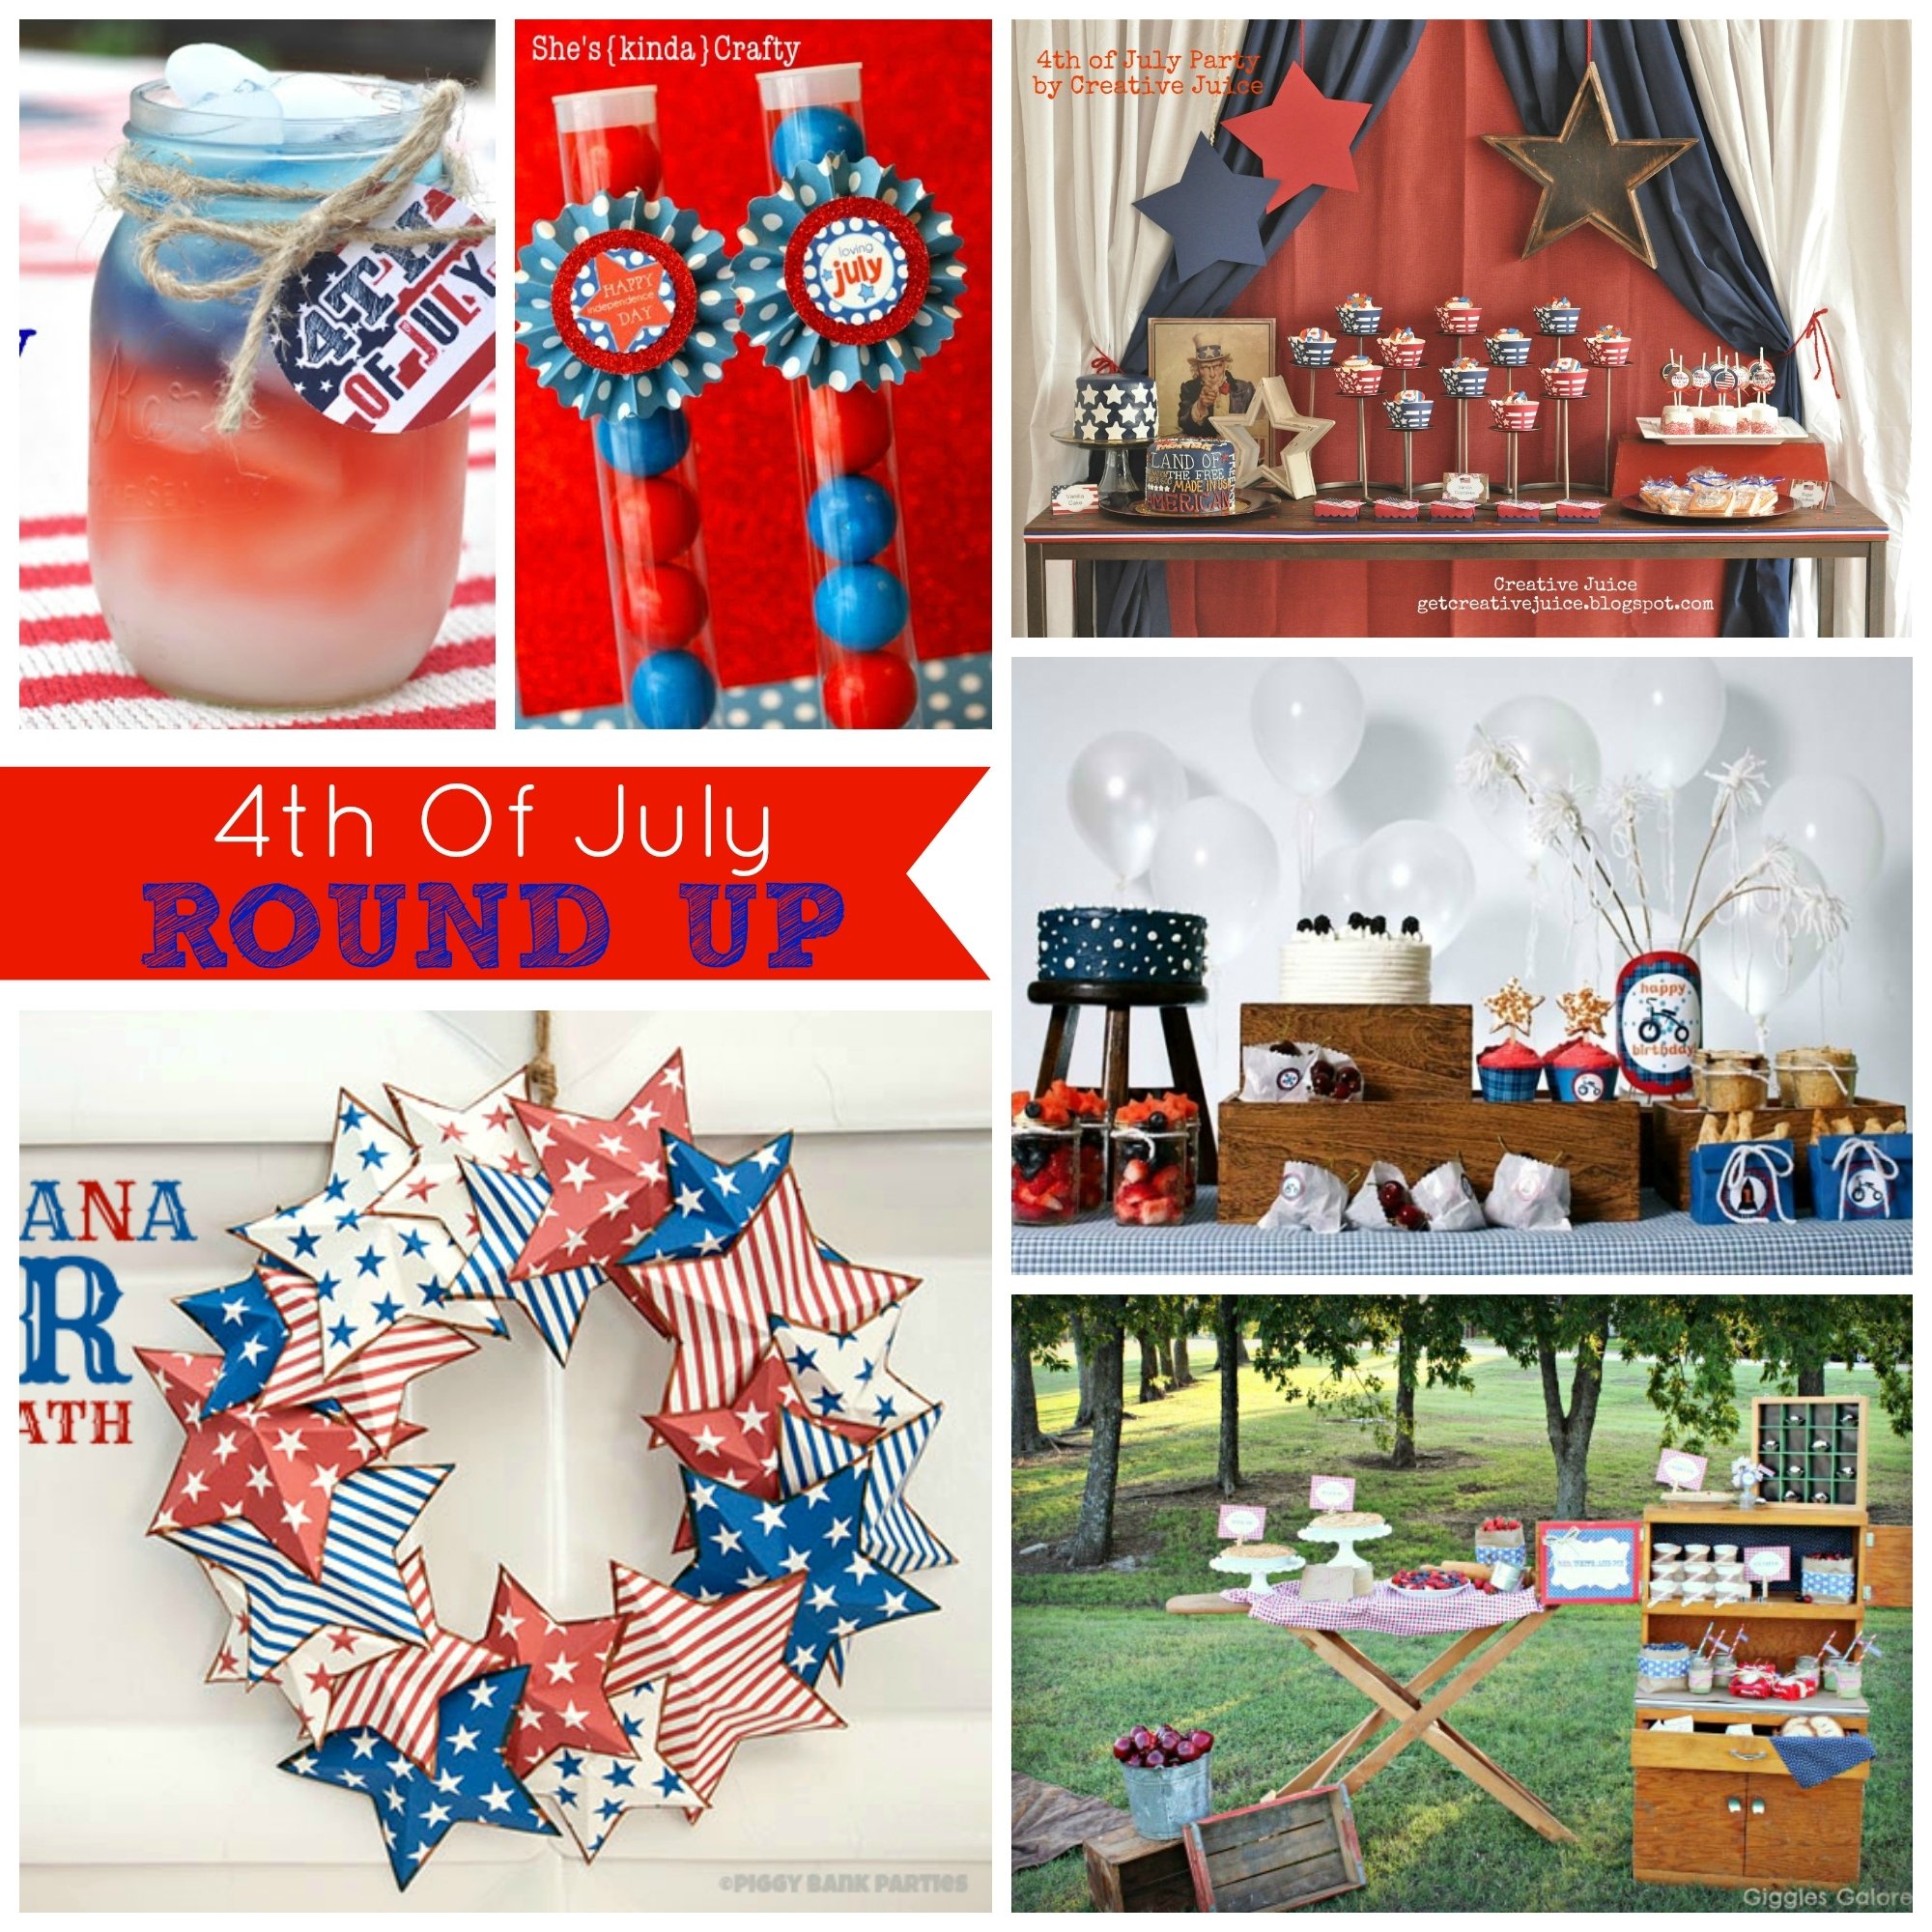 10 Most Popular 4Th Of July Party Ideas round up 4th of july party ideas creative juice 5 2022